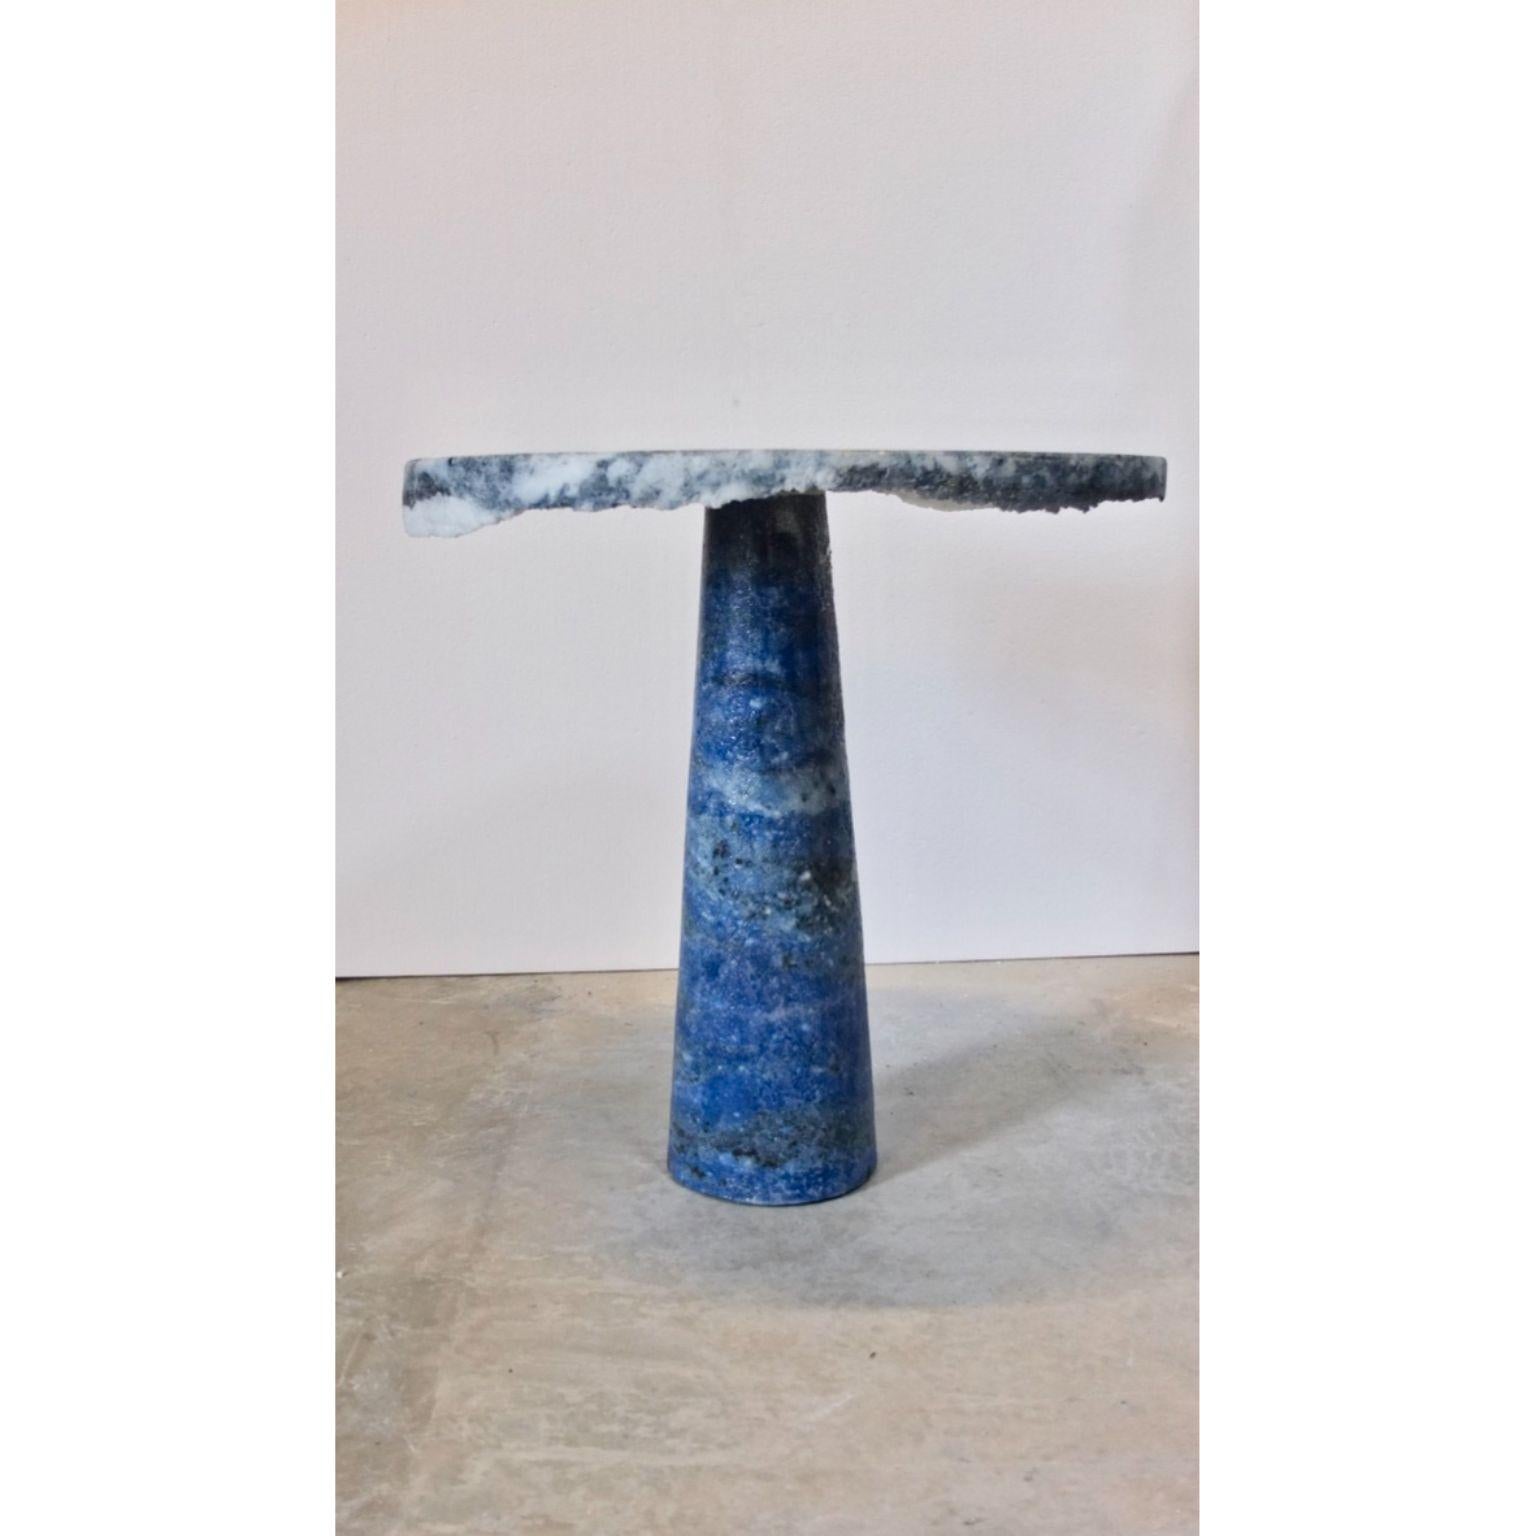 Marble salt side table by Roxane Lahidji
Material: Marbled salts
 A unique award winning technique developed by Roxane Lahidji
Dimensions: 50 x 50 x 50 cm
Unique 
Other dimensions available.

Award winner of Bolia Design Awards 2019 and FD100 and